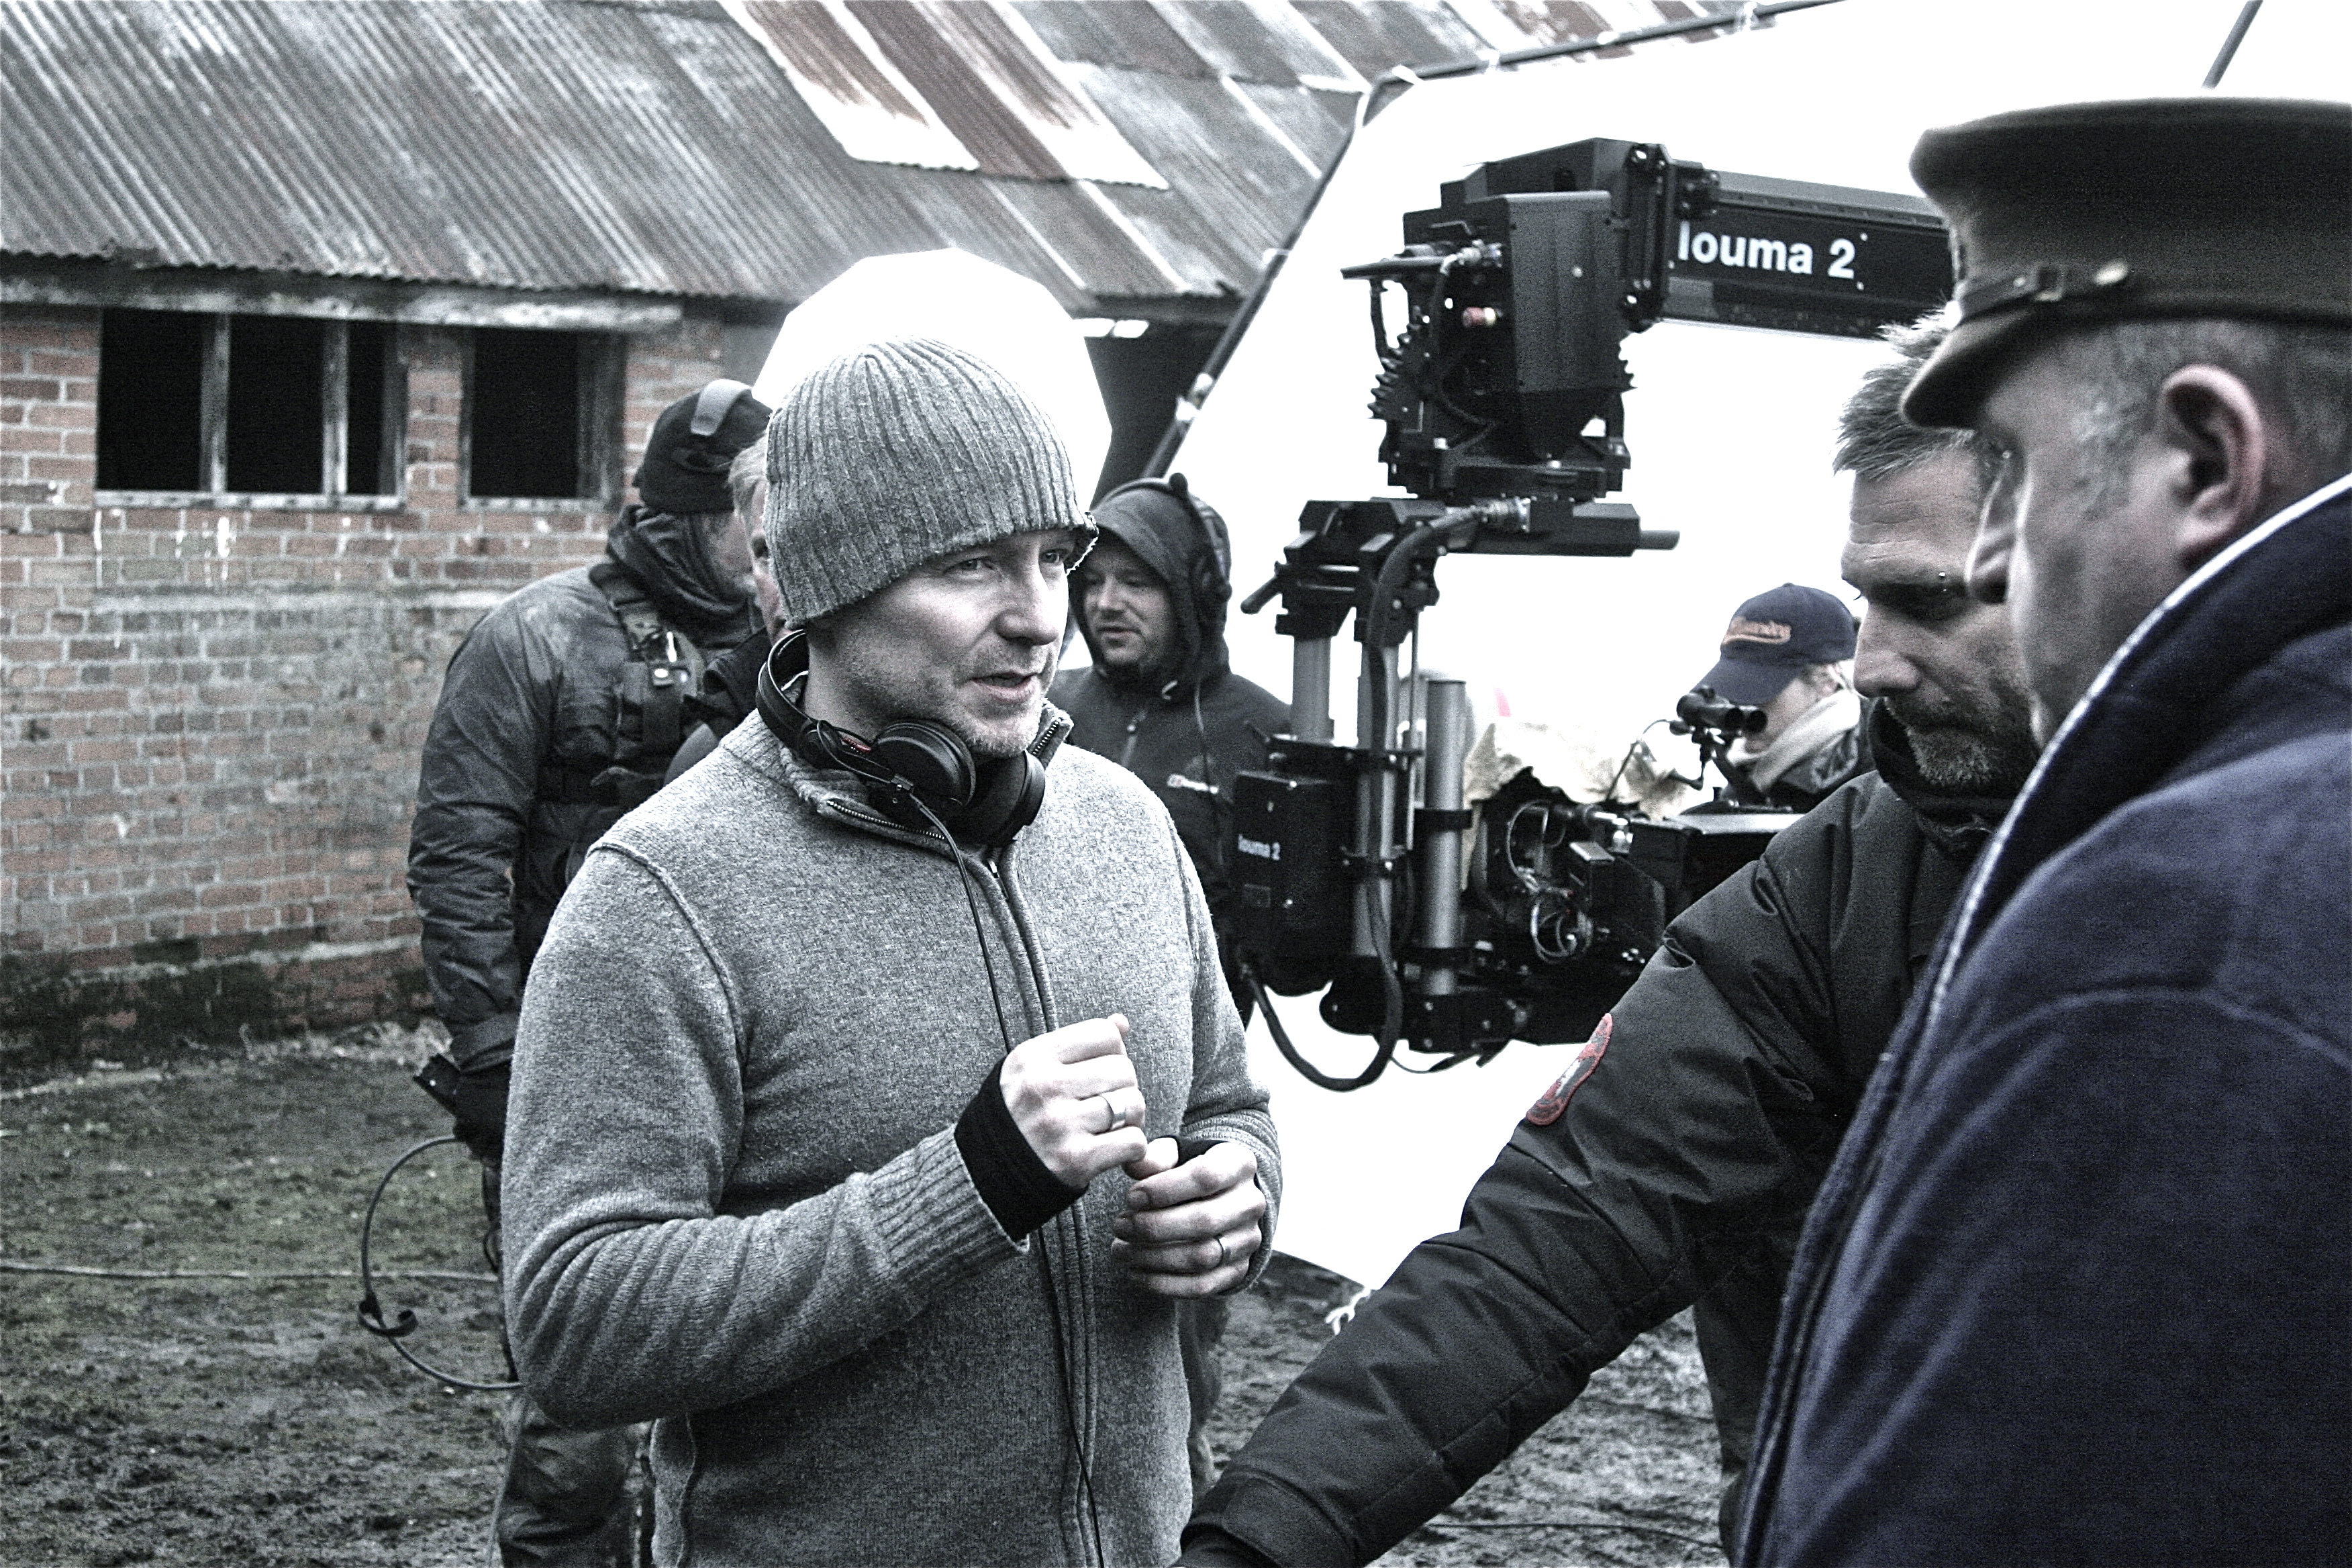 On set of 'Waiting for Dawn' with Director Richard Cousins and actor Jason Furnival.